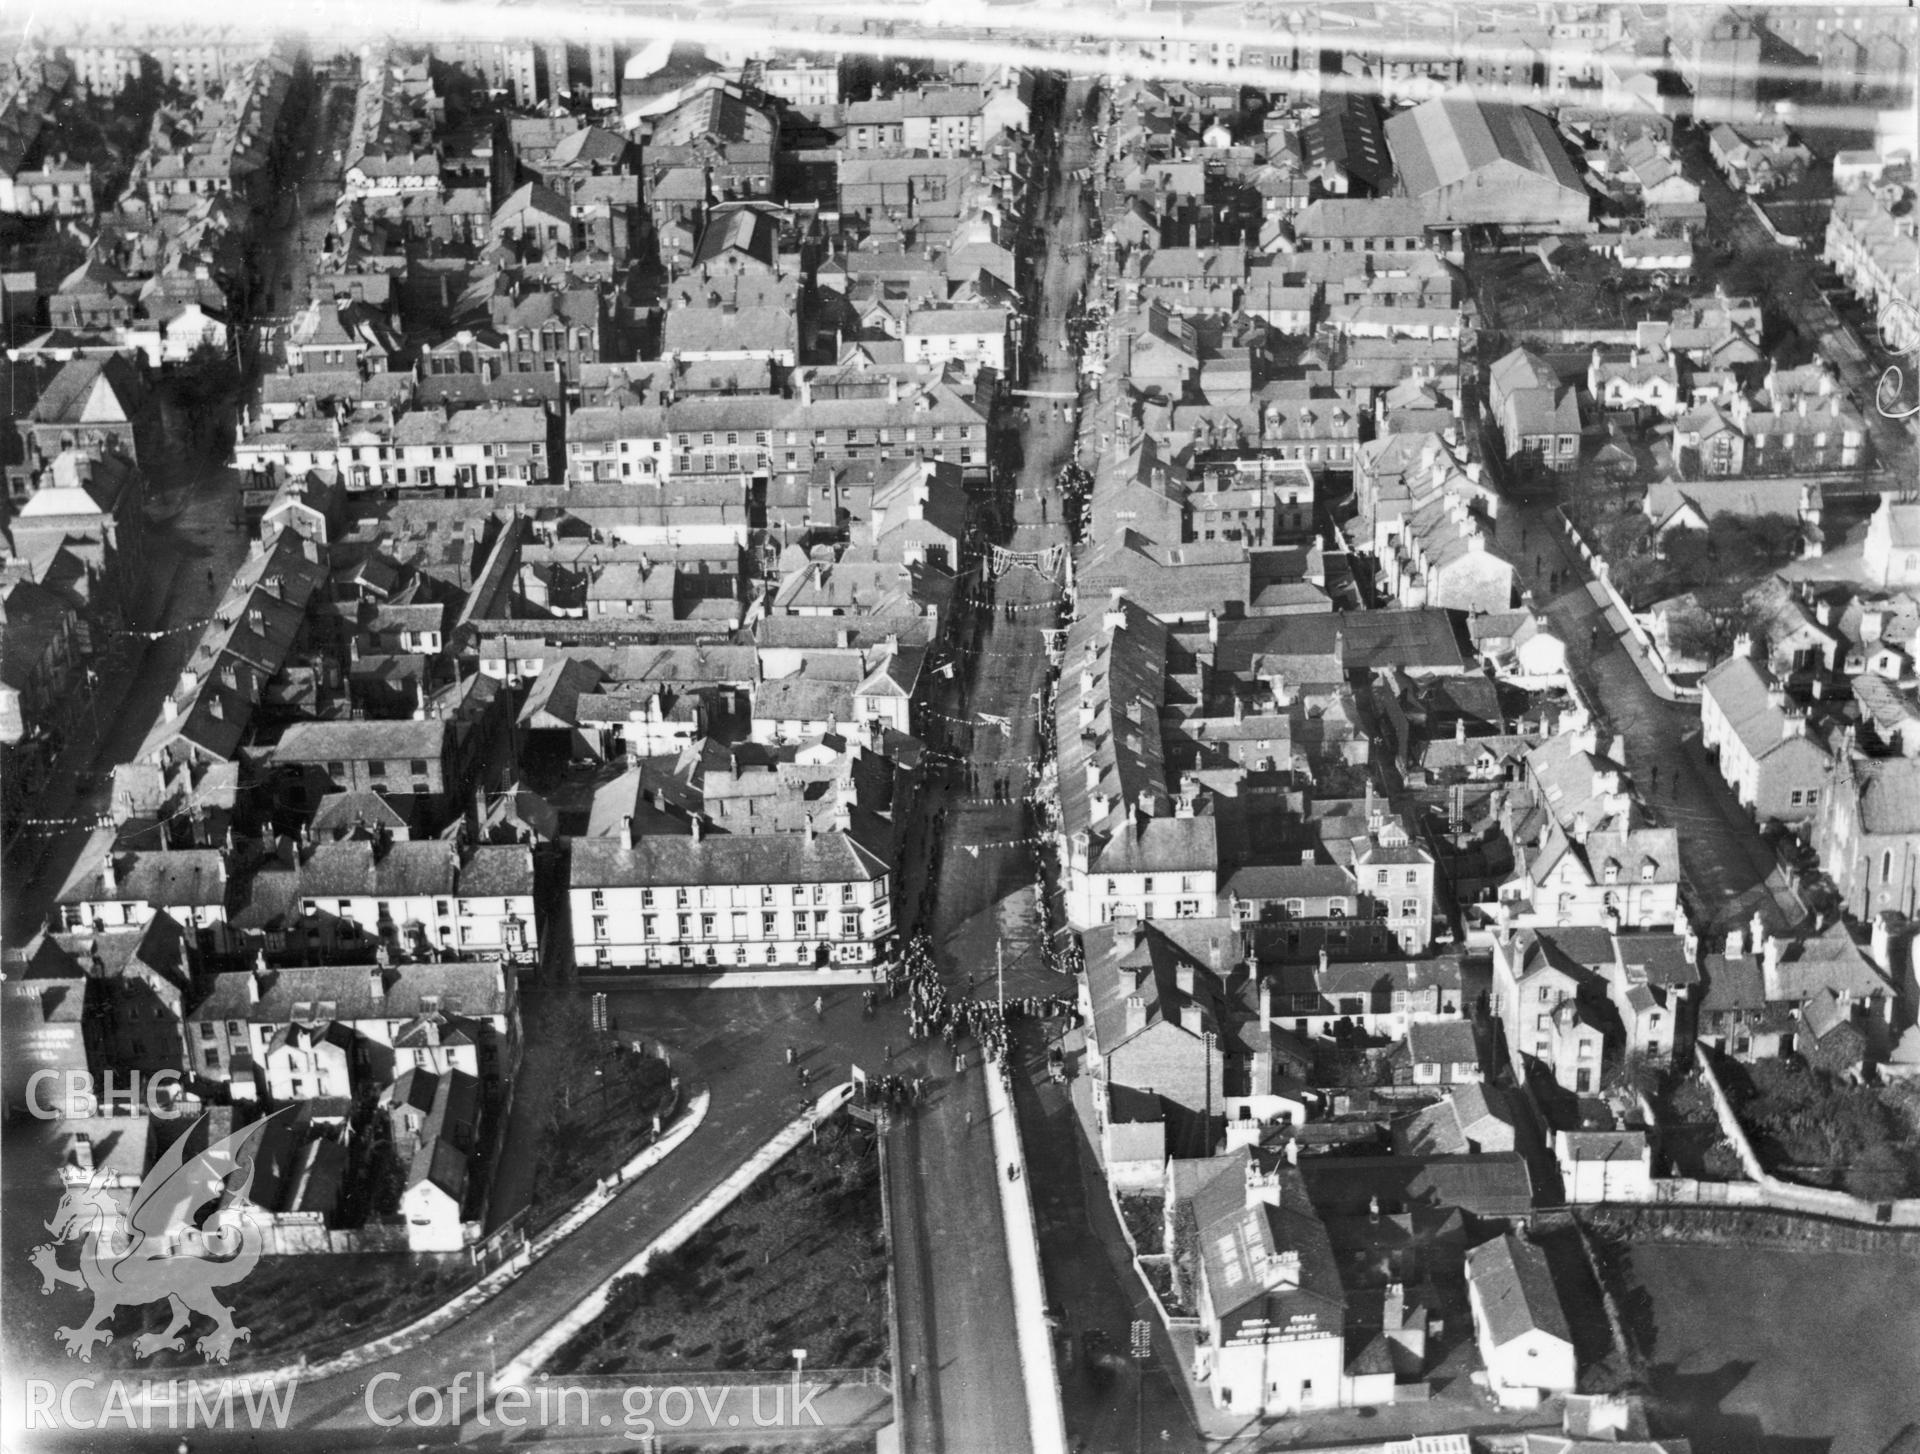 Black and white oblique aerial photograph of the town of Rhyl  dated 16th November1923 showing crowds during a visit by the Prince of Wales. Aerofilms album Flints M-Z (W17).